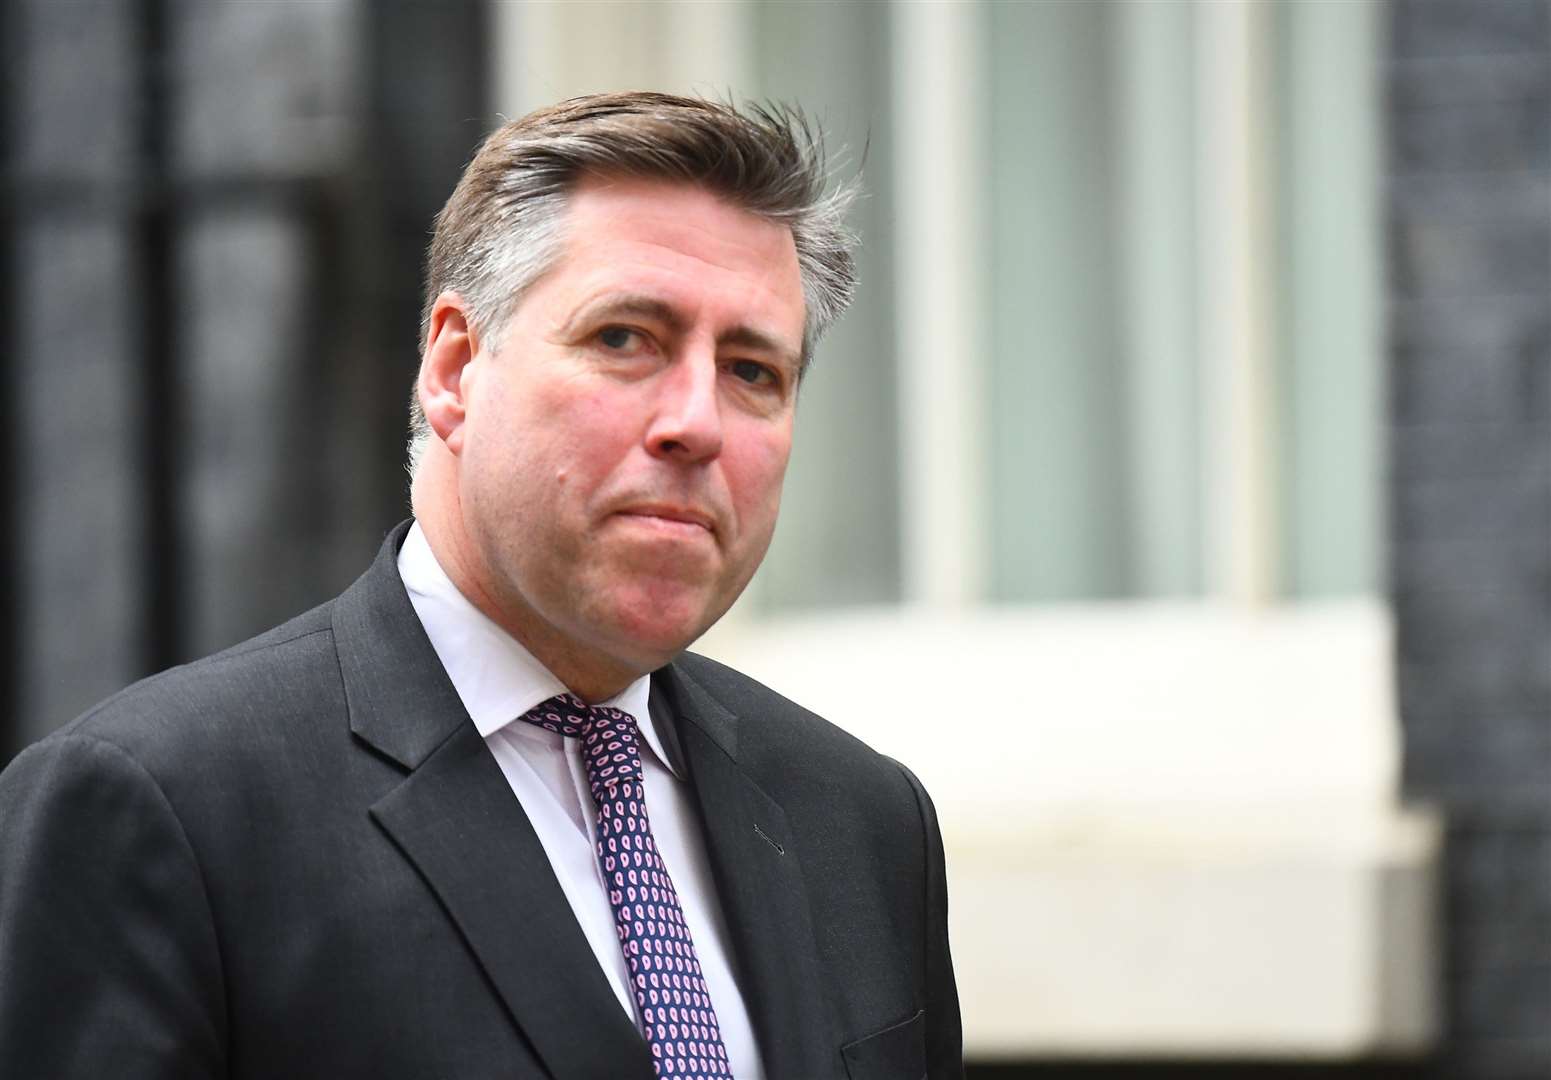 Sir Graham Brady, chairman of the 1922 Committee of Tory backbenchers. Picture: Victoria Jones/PA